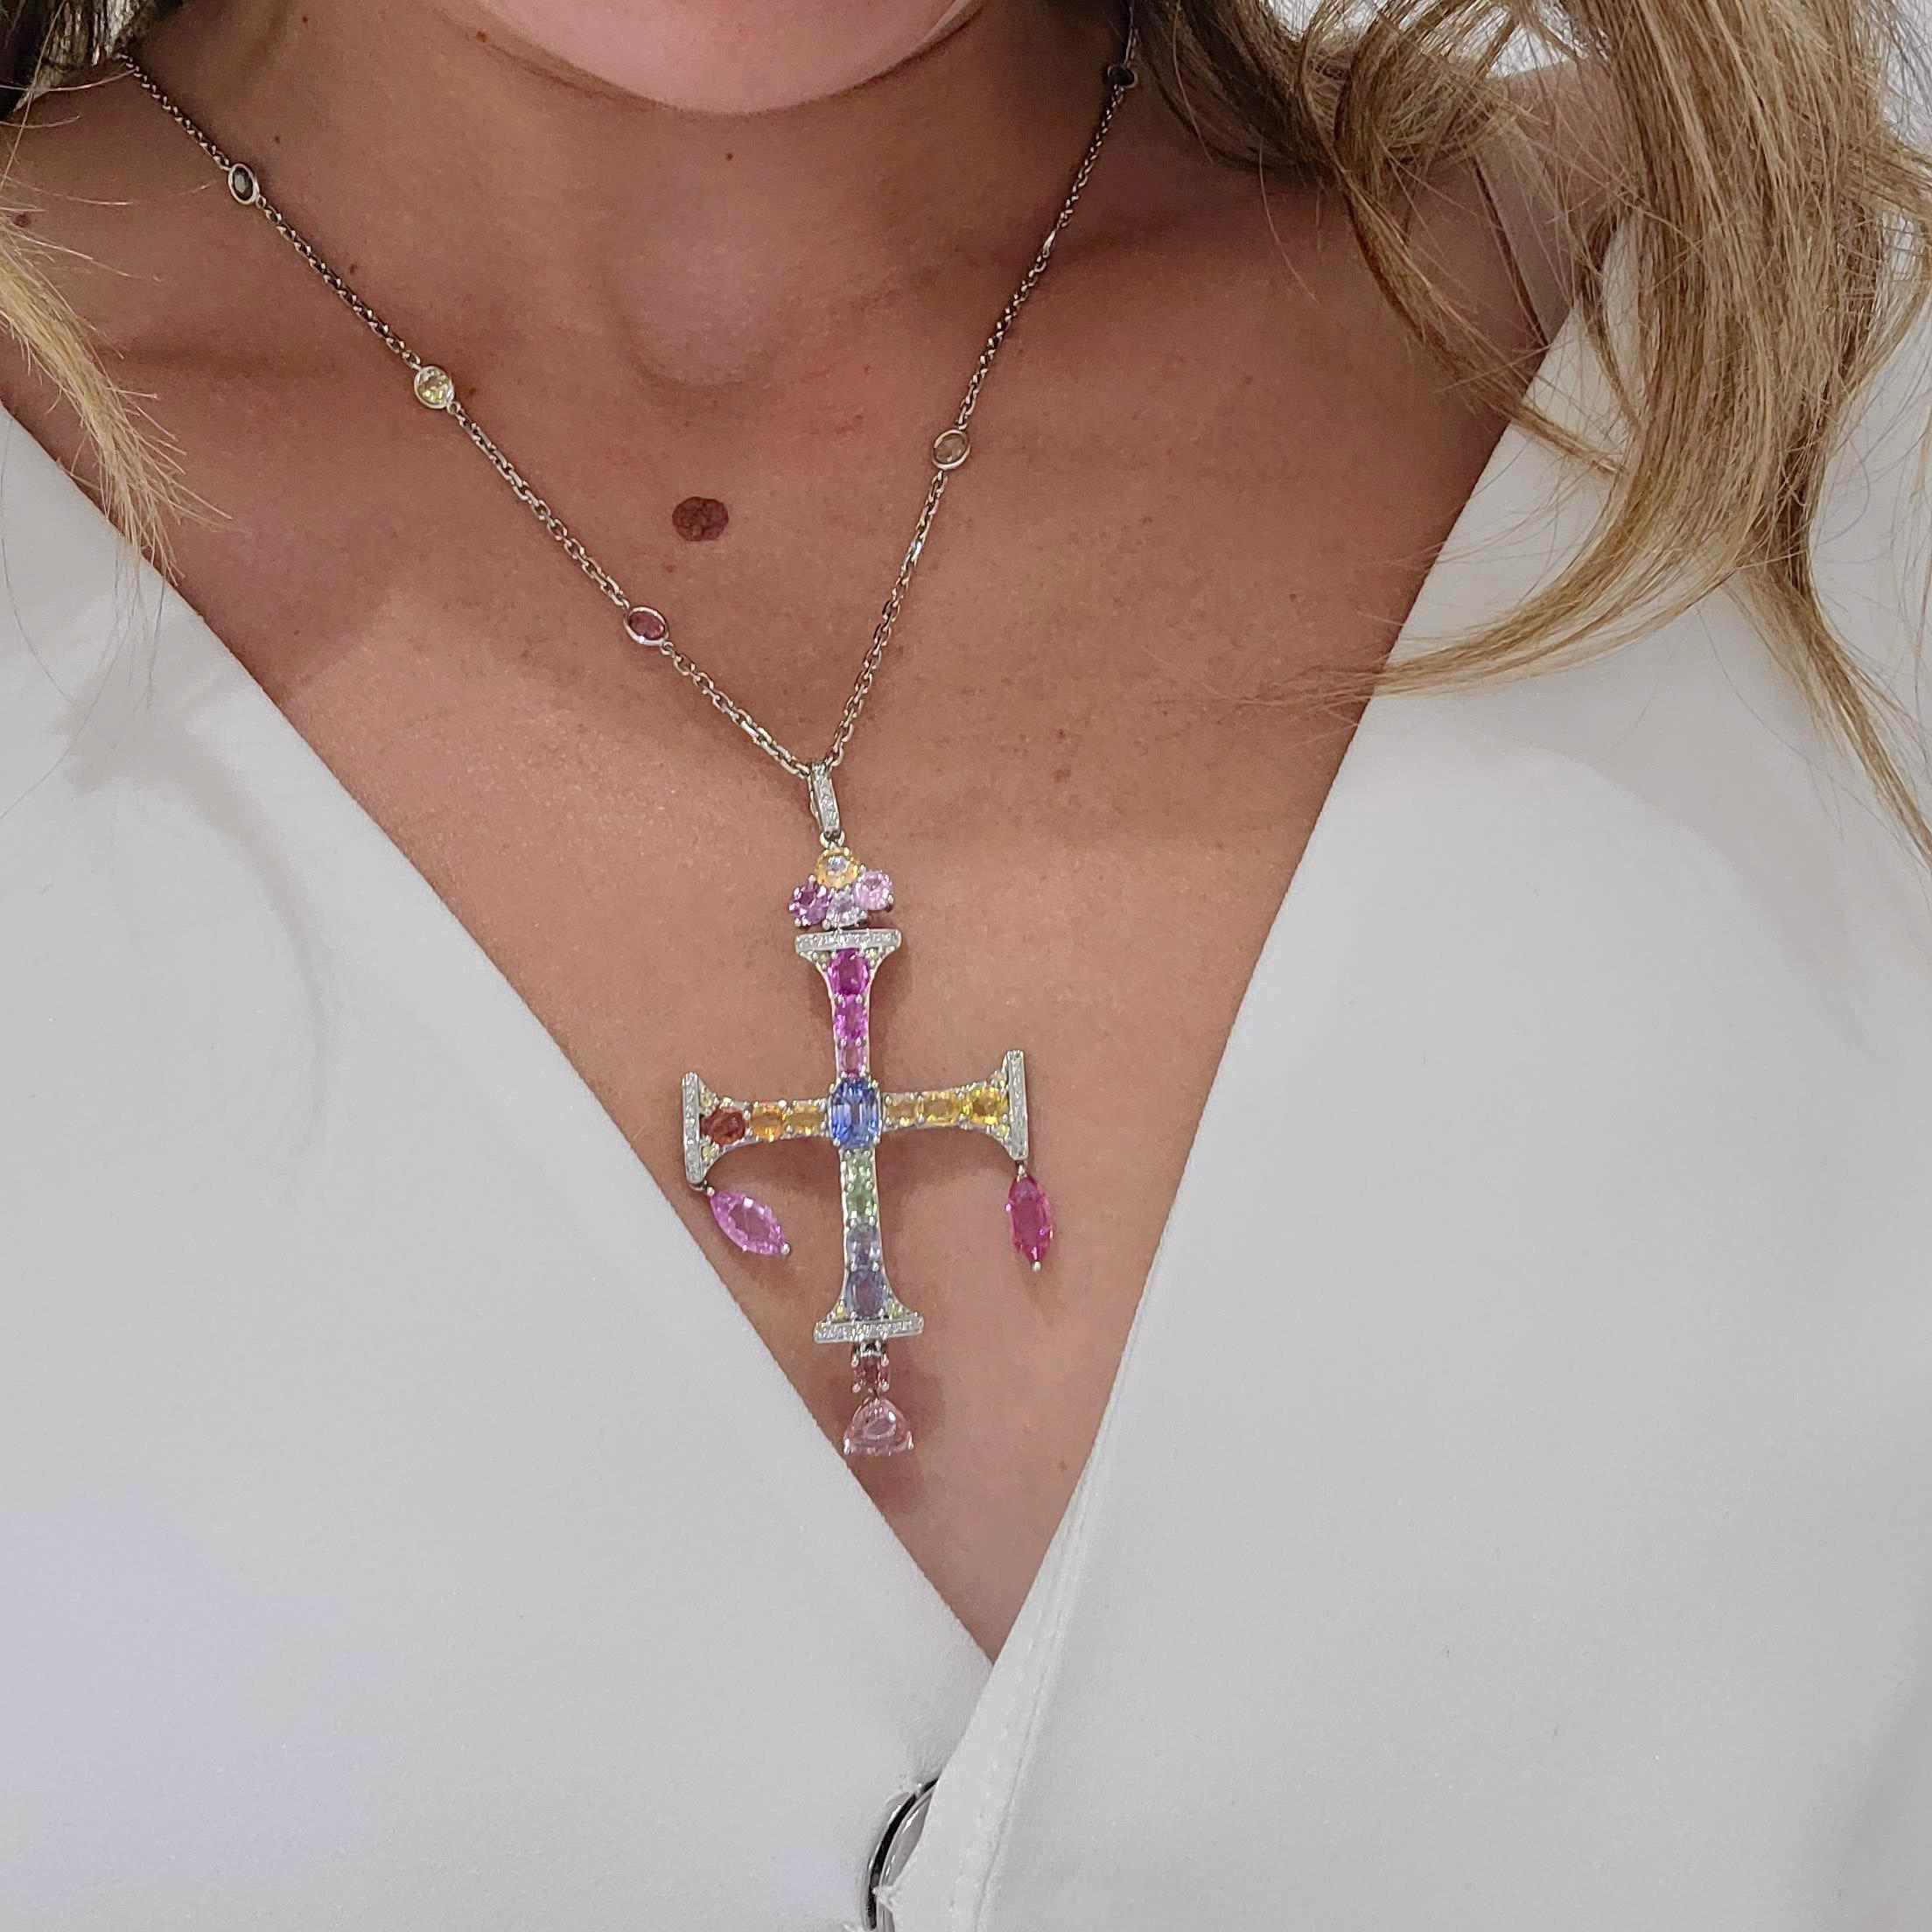 This beautiful 18 karat white gold cross is set with Round Sapphires in shades of blue, yellow, pink, orange and green. Pink Sapphires in Marquis and Trillion cut dangle from the ends which have been set with Diamonds. The cross and it's Diamond